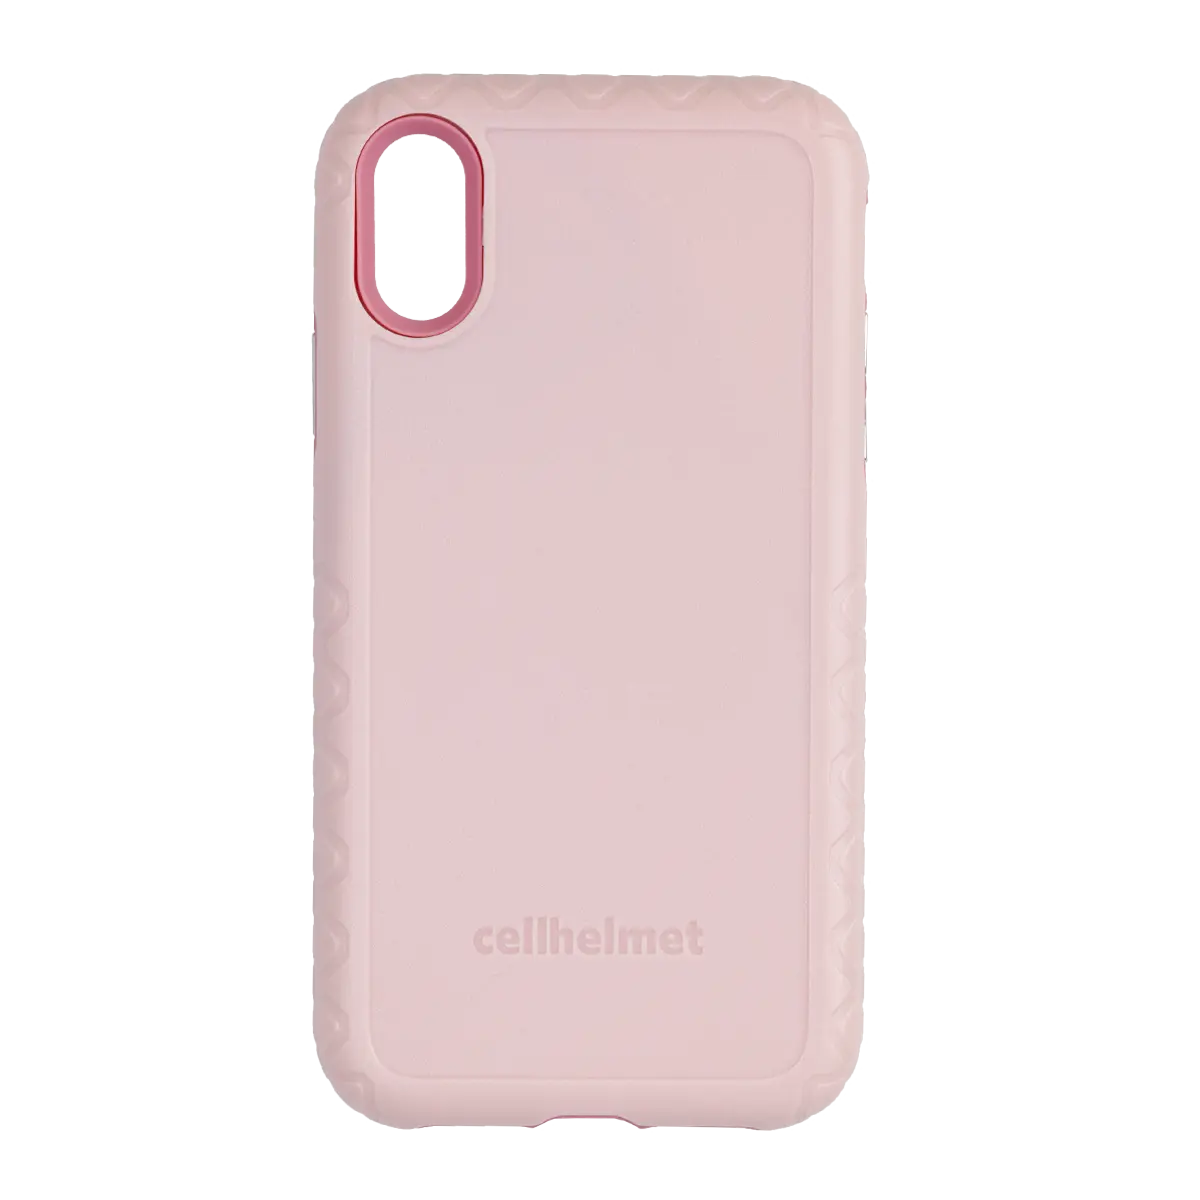 Pink cellhelmet Customizable Case for iPhone XS